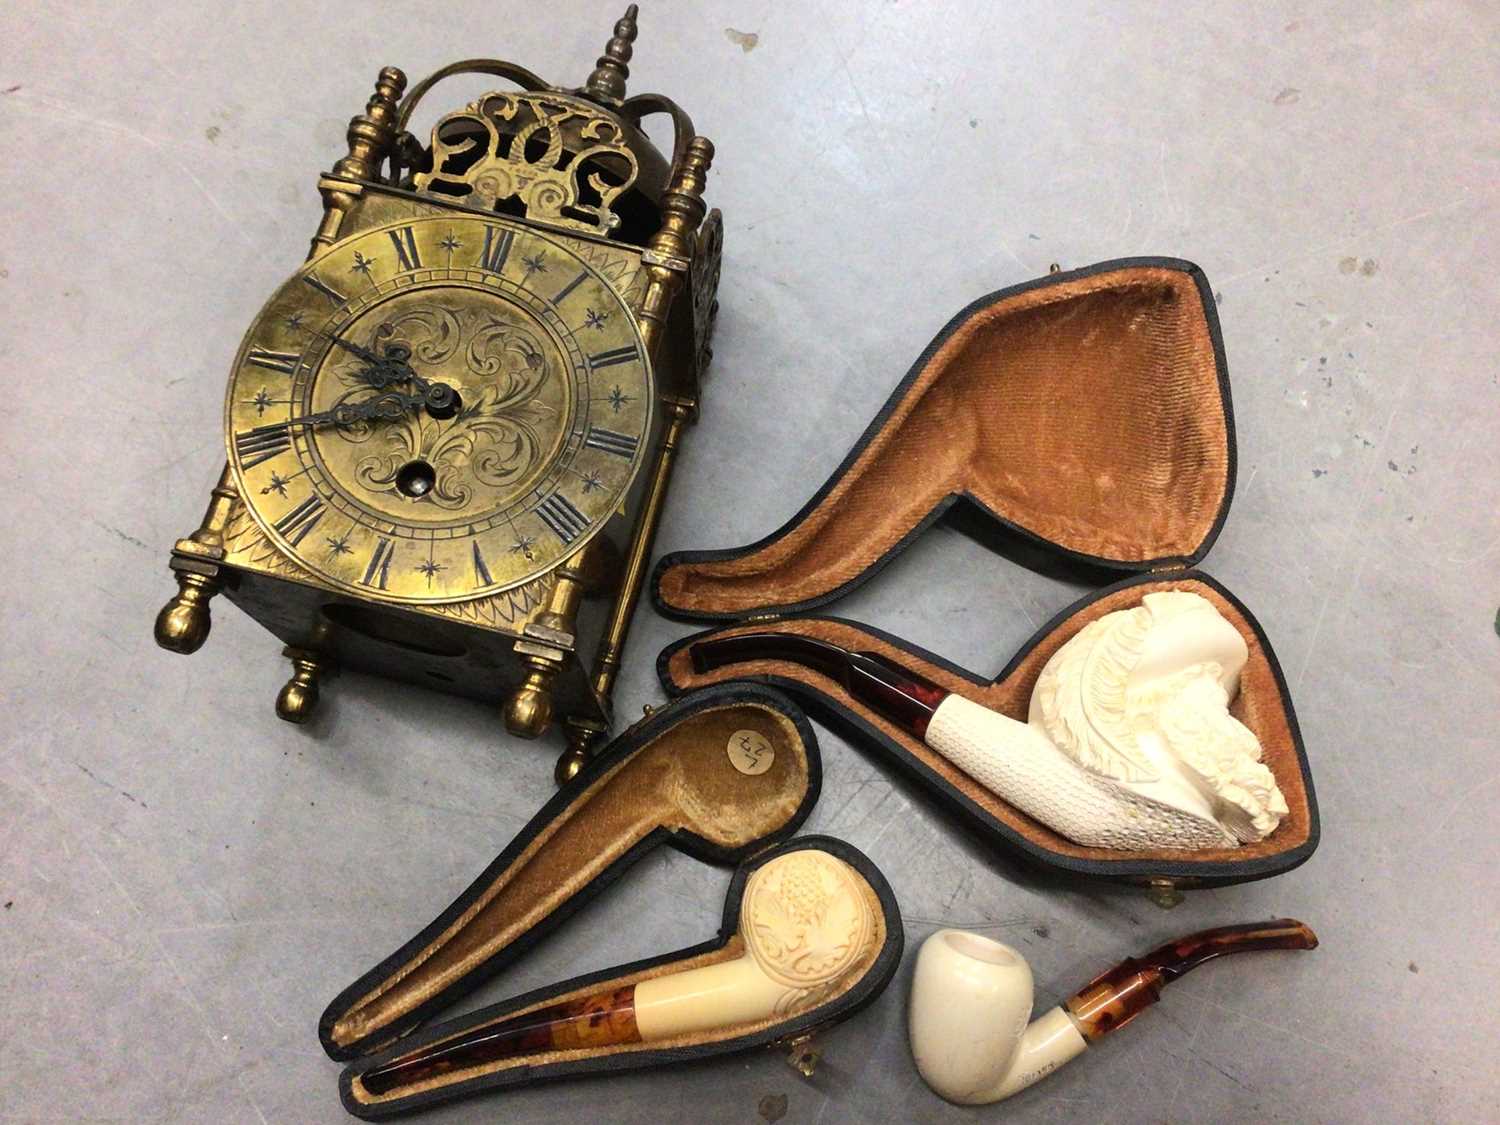 Three cased meerschaum pipes, together with a 17th century style brass lantern clock